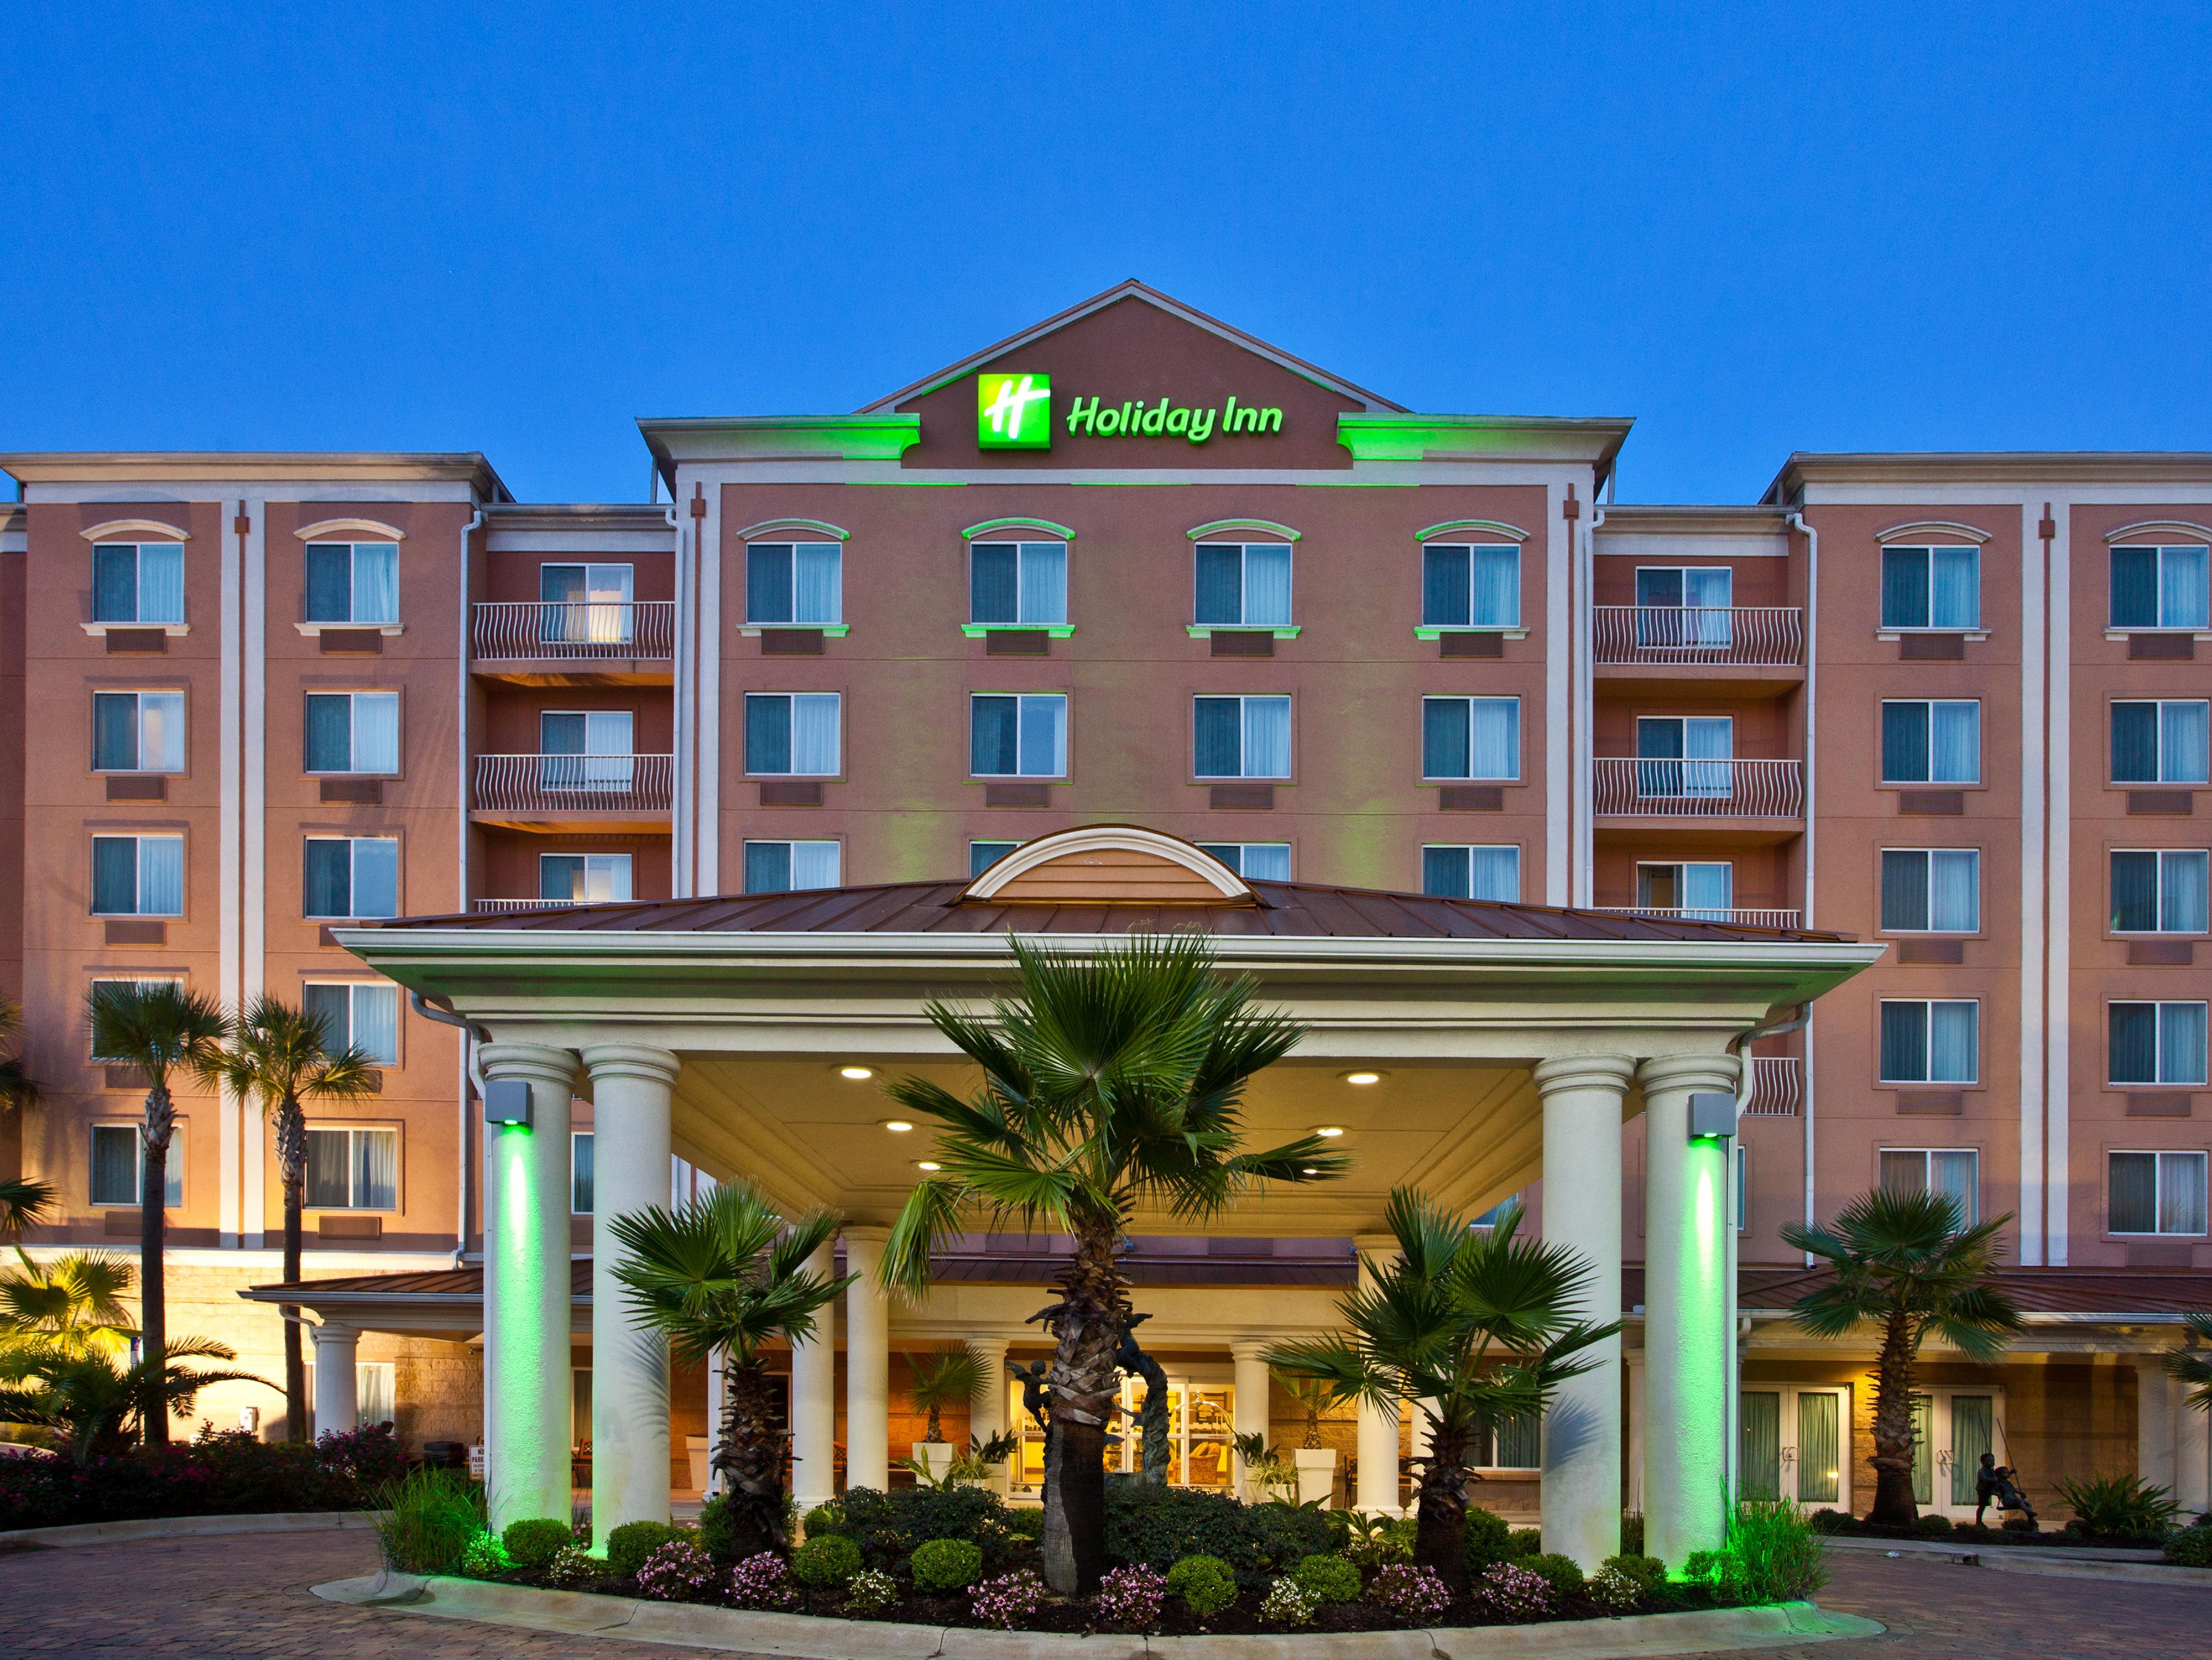 Holiday Inn Hotel And Suites Lake City 4026876370 4x3